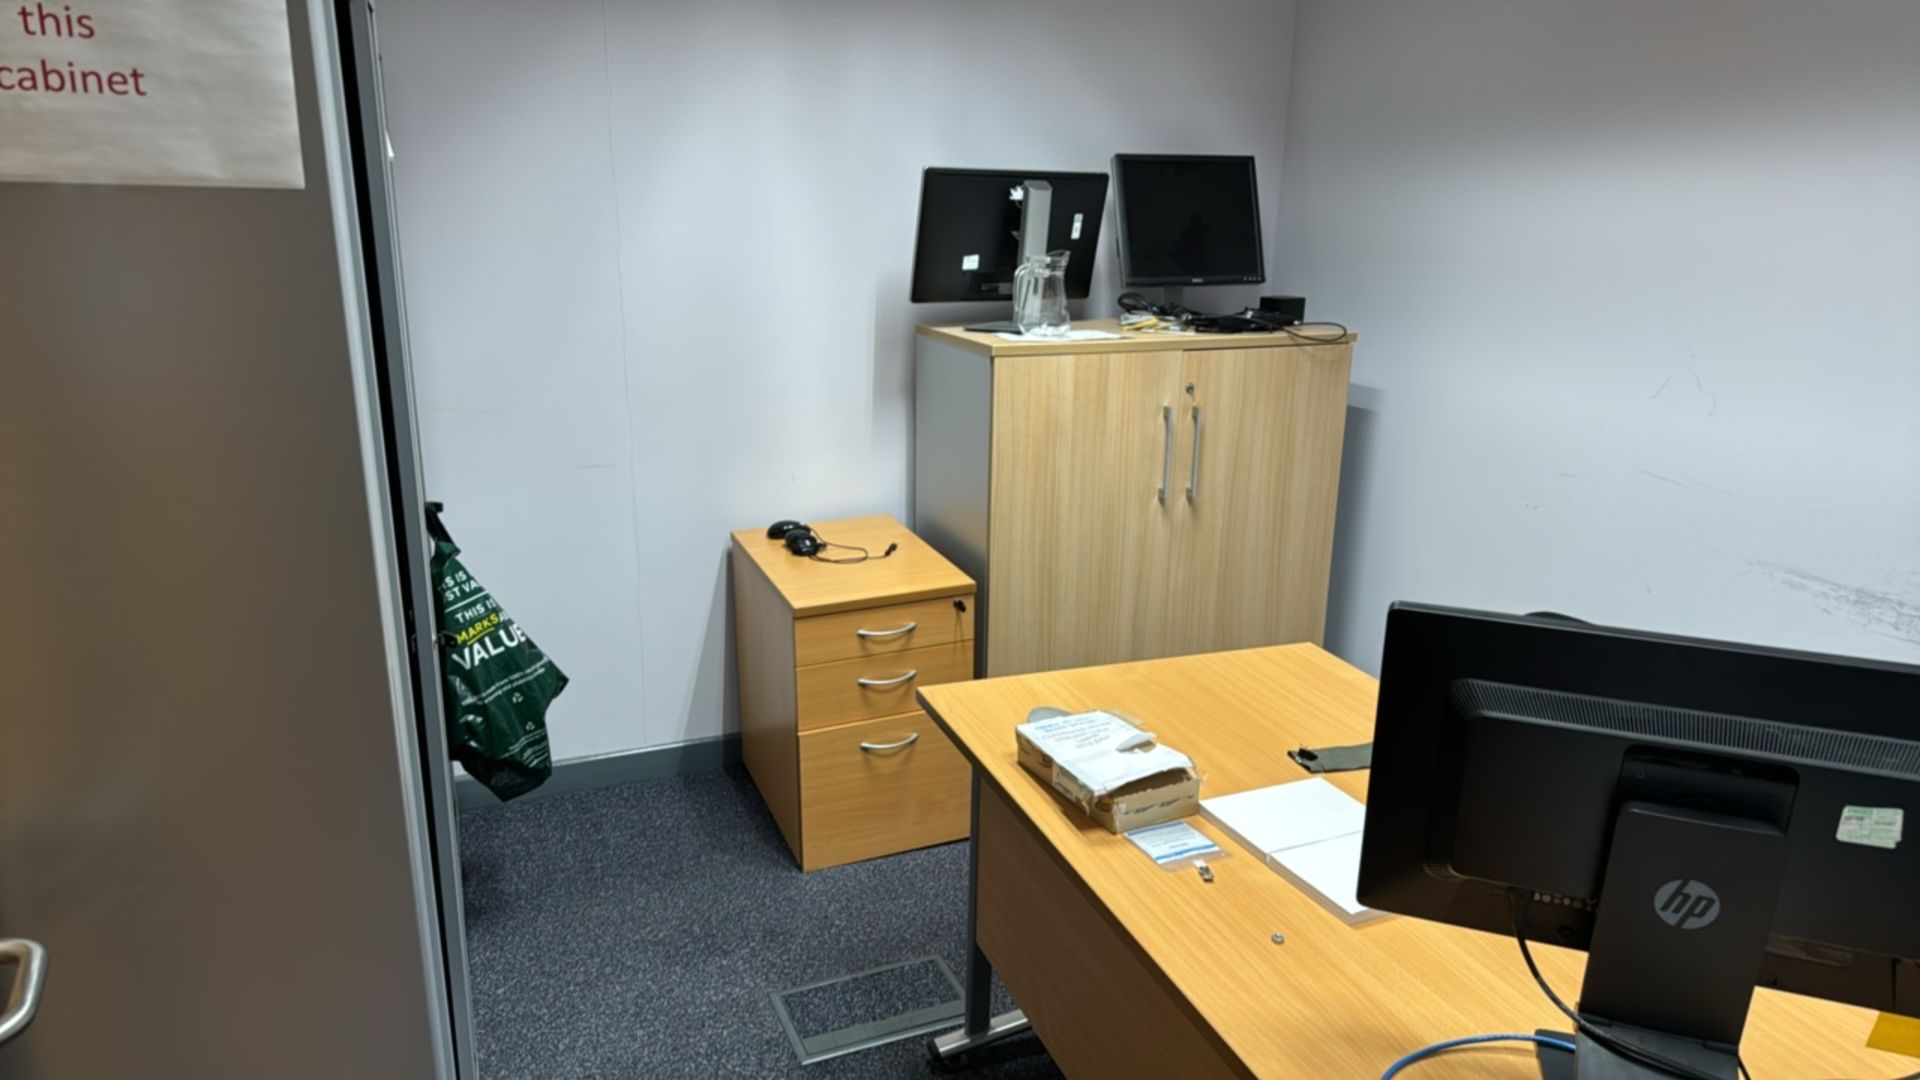 ref 238 - Office Contents - Image 2 of 8